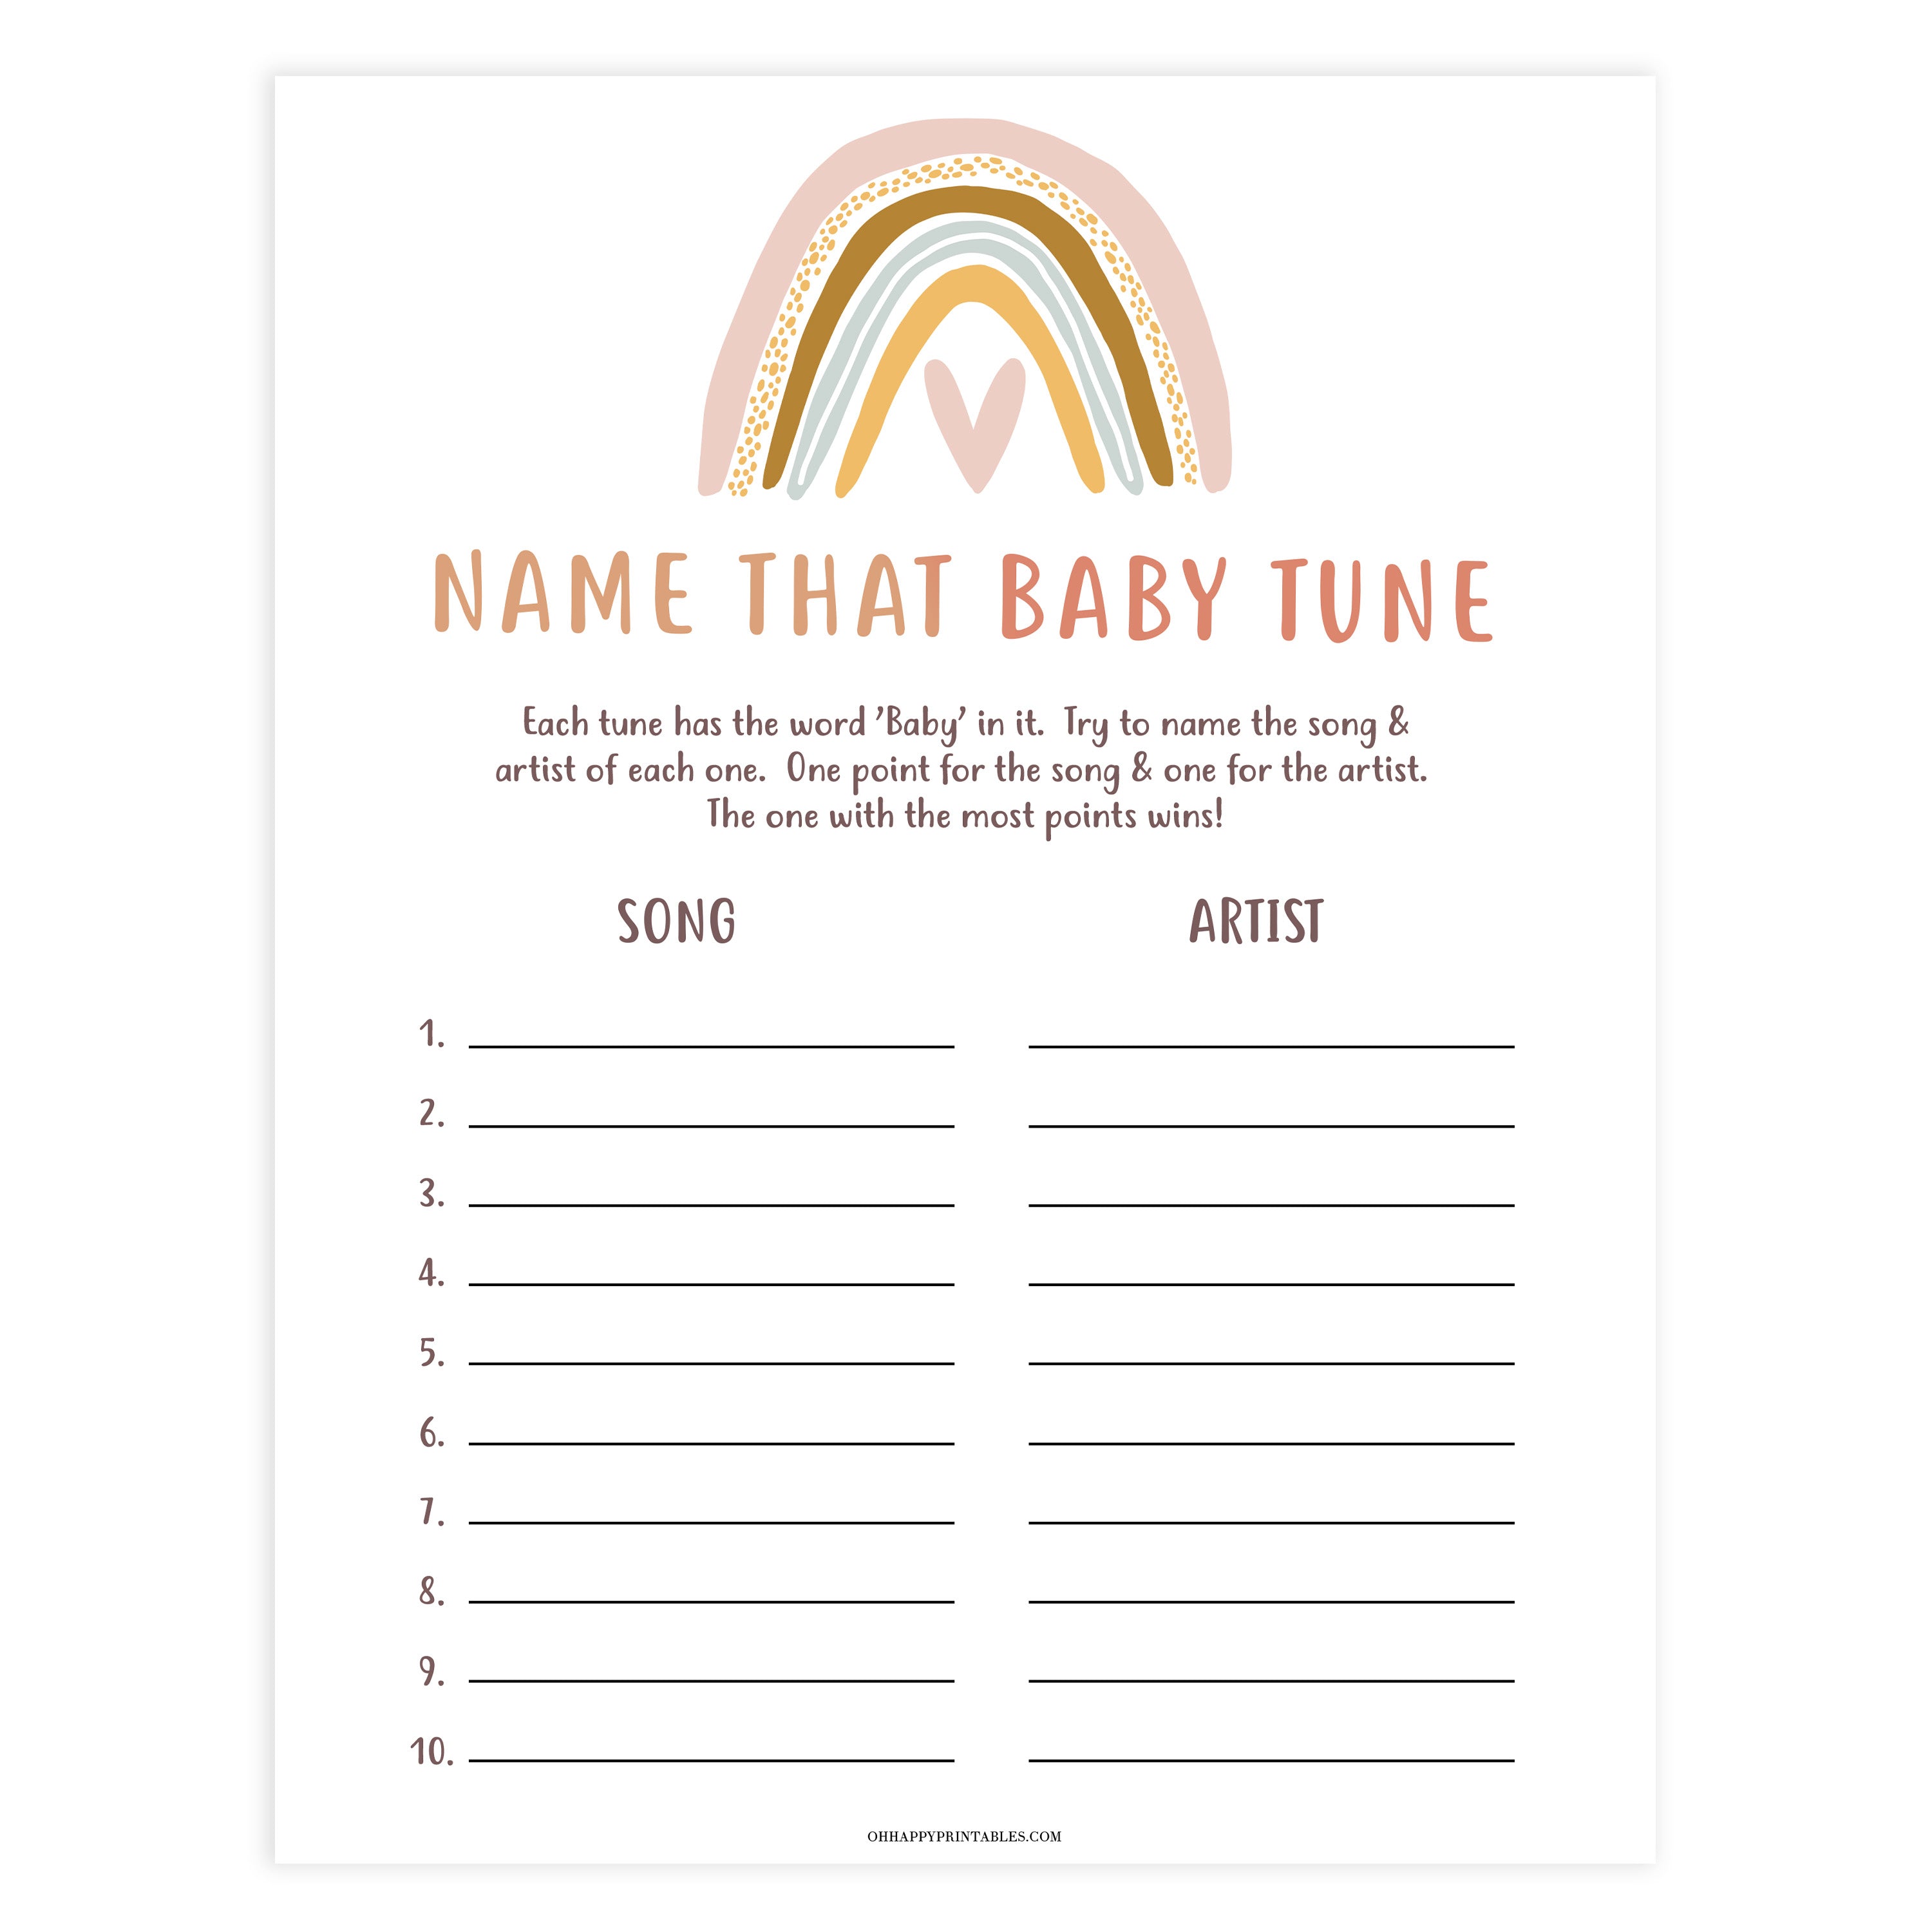 name that baby tune game, Printable baby shower games, boho rainbow baby games, baby shower games, fun baby shower ideas, top baby shower ideas, boho rainbow baby shower, baby shower games, fun boho rainbow baby shower ideas